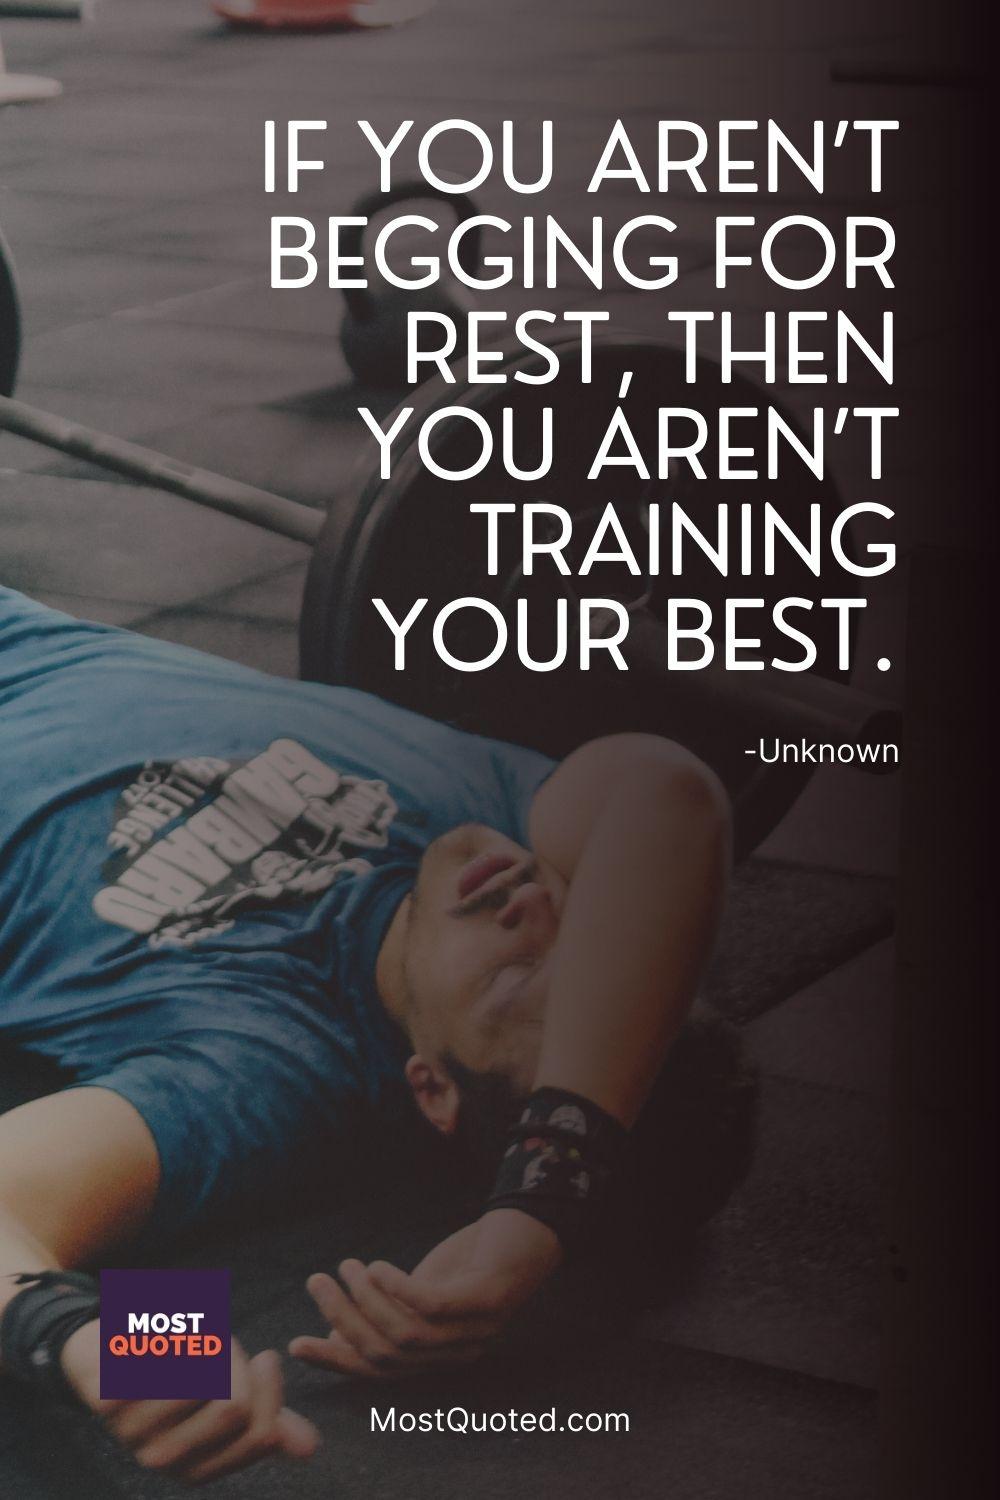 If you aren’t begging for rest, then you aren’t training your best.